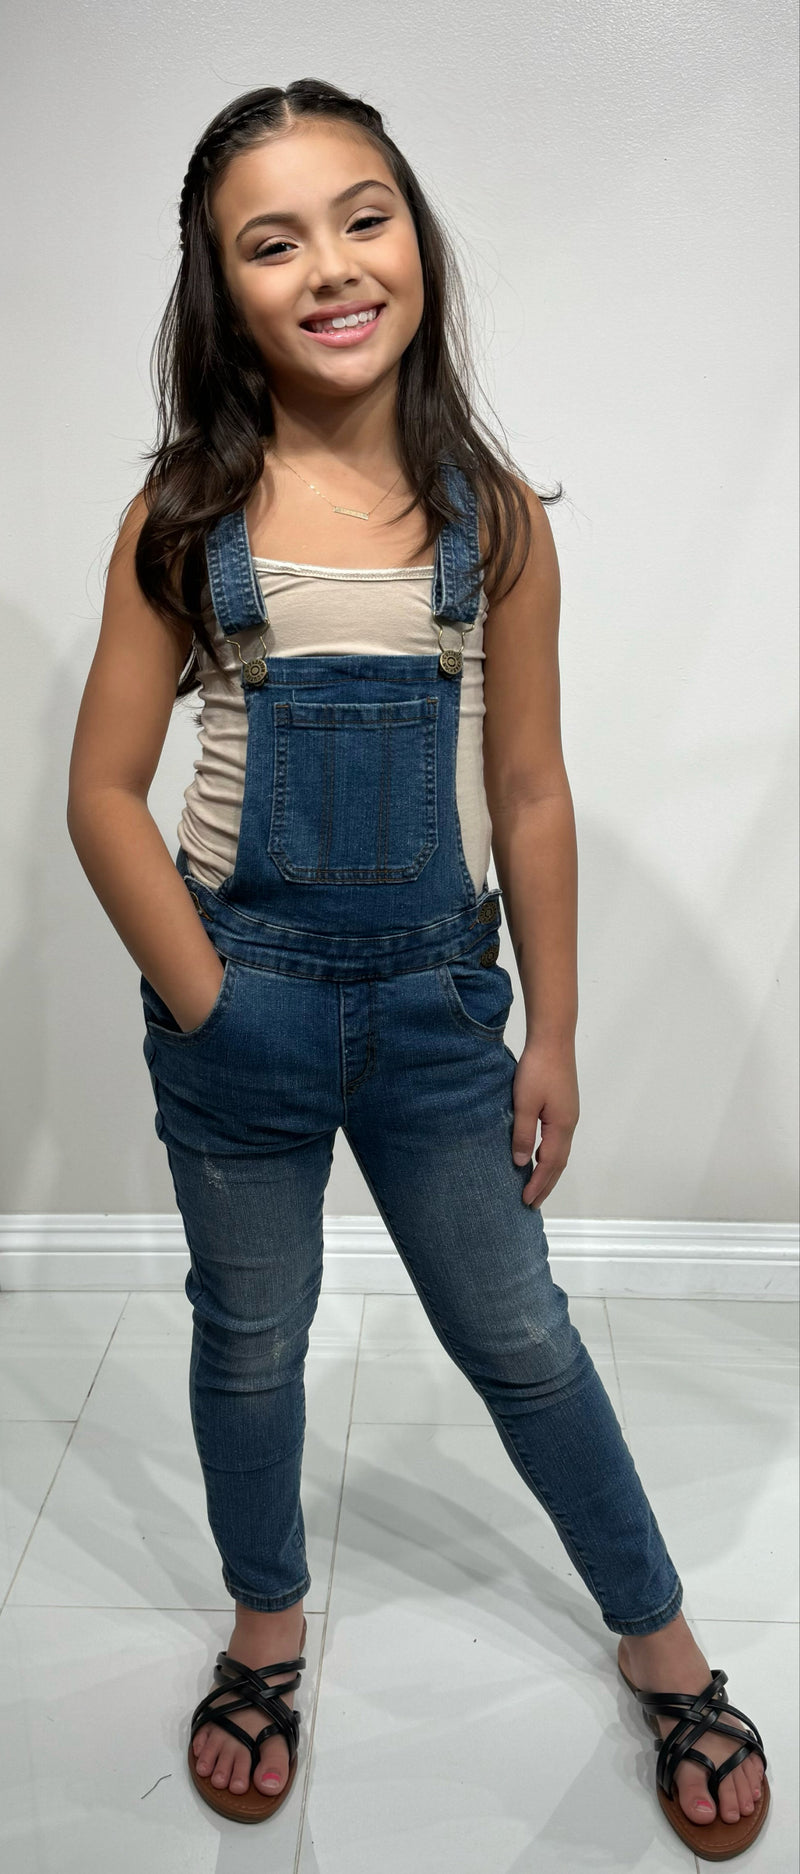 Jeans Warehouse Hawaii - DRESSES 4-6X - HOW CAN I OVERALLS | KIDS SIZE 4-6X | By DANIEL L